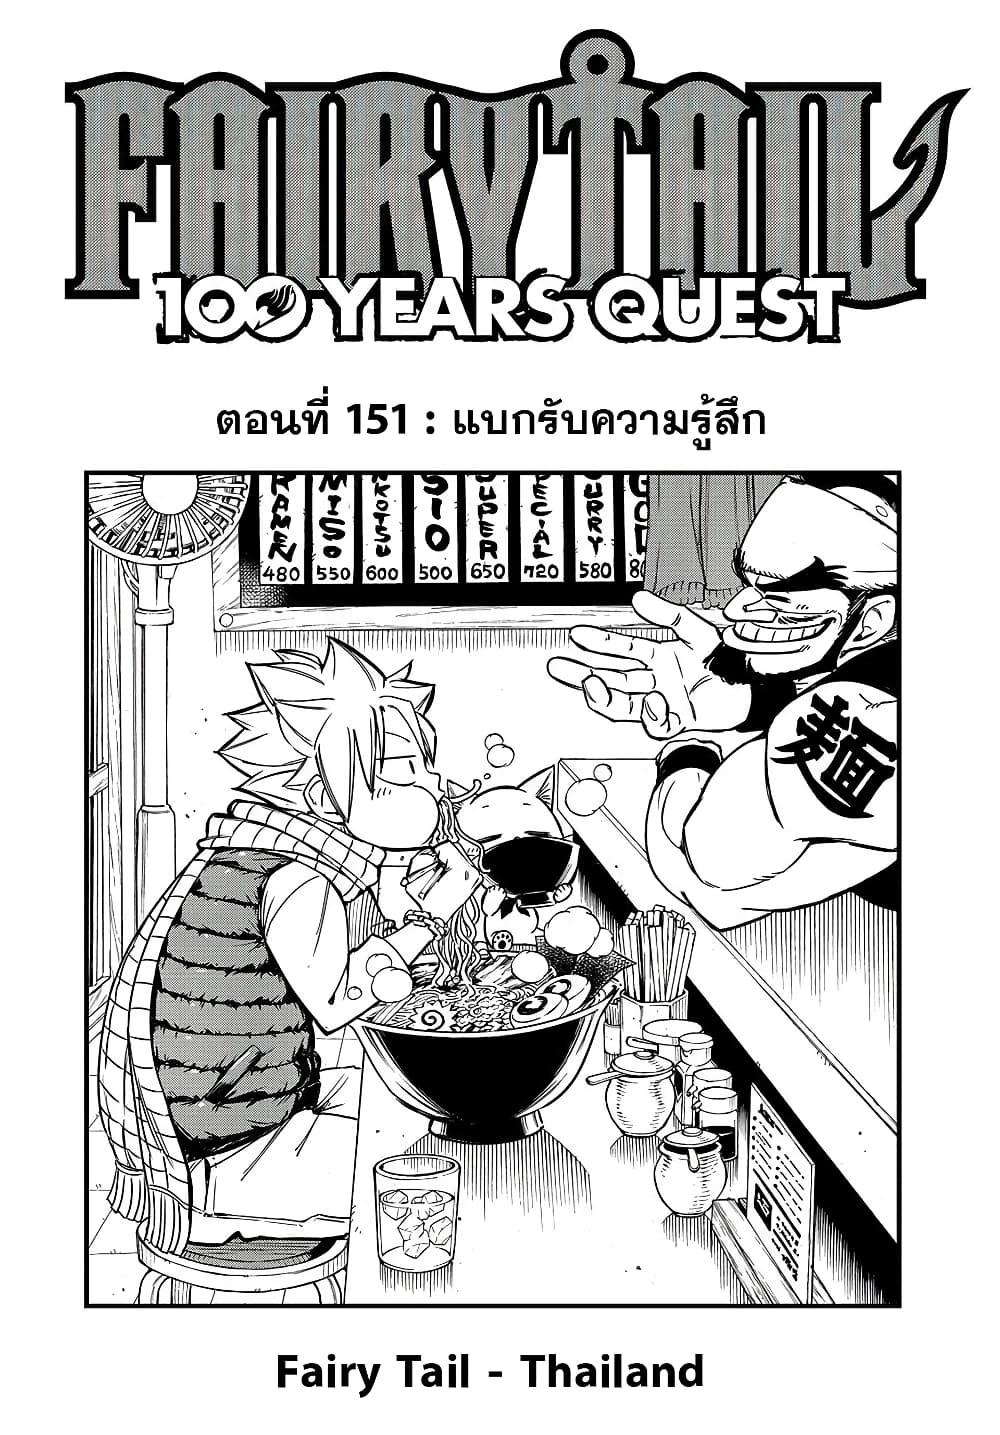 Fairy Tail 100 Years Quest ตอนที่ 151 (1)